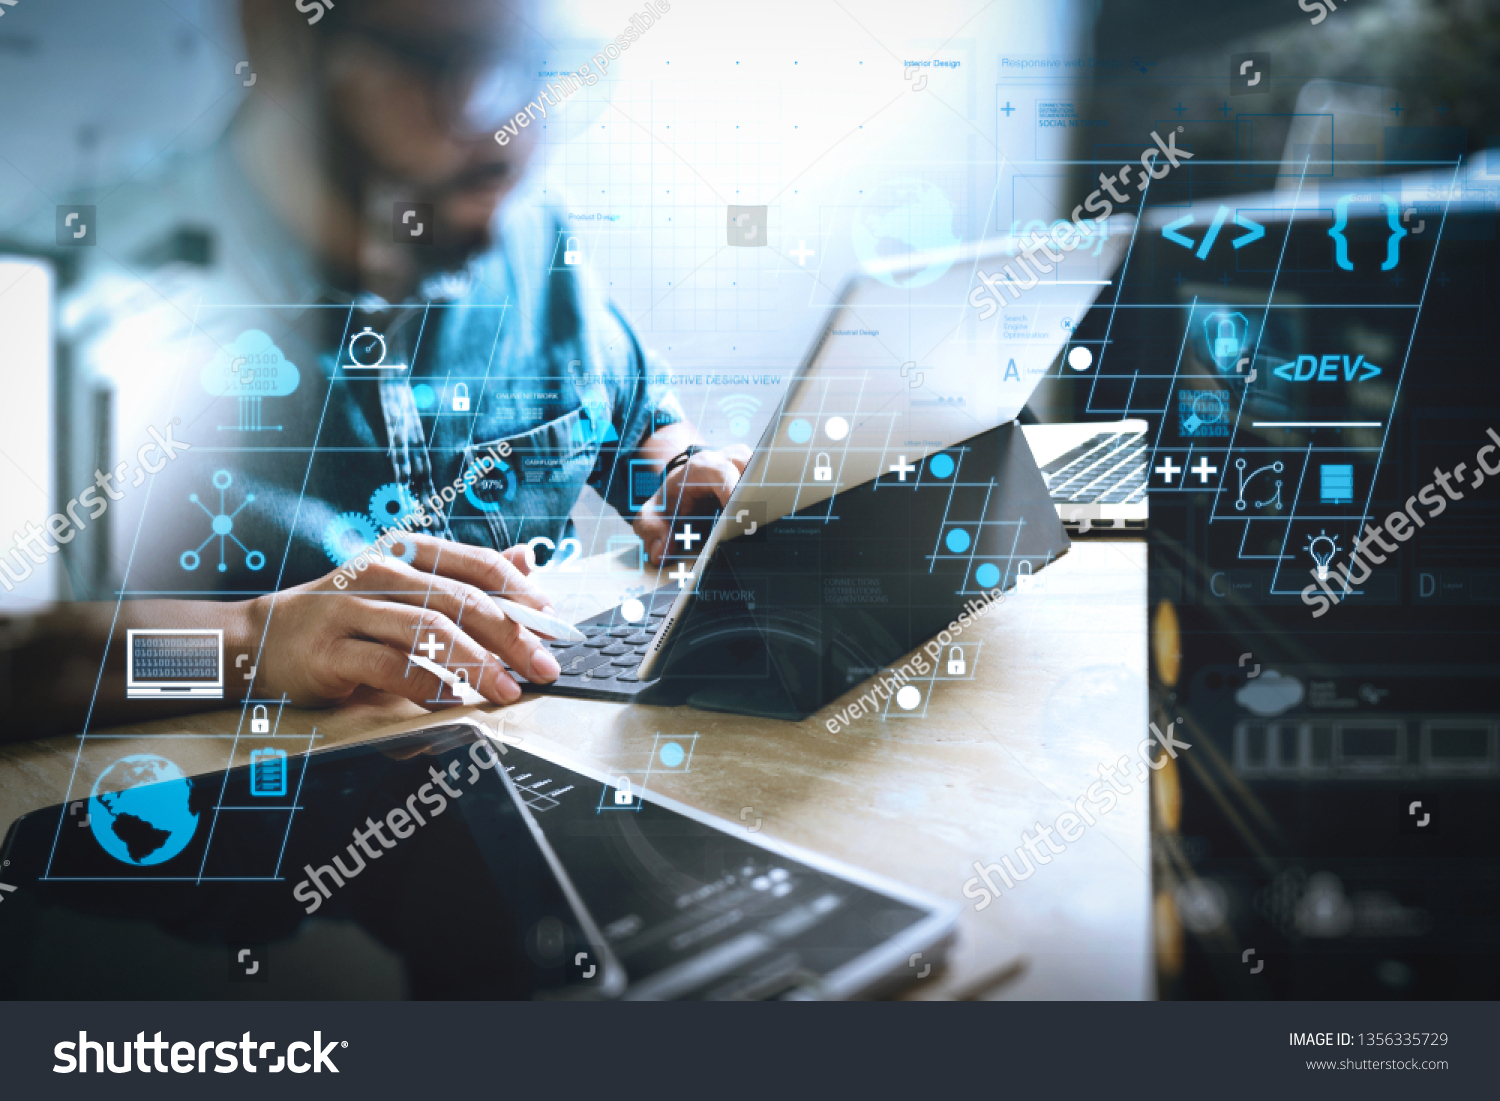 Coding software developer work with AR new design dashboard computer icons of scrum agile development and code fork and versioning with responsive cybersecurity.Co working process, team working. #1356335729